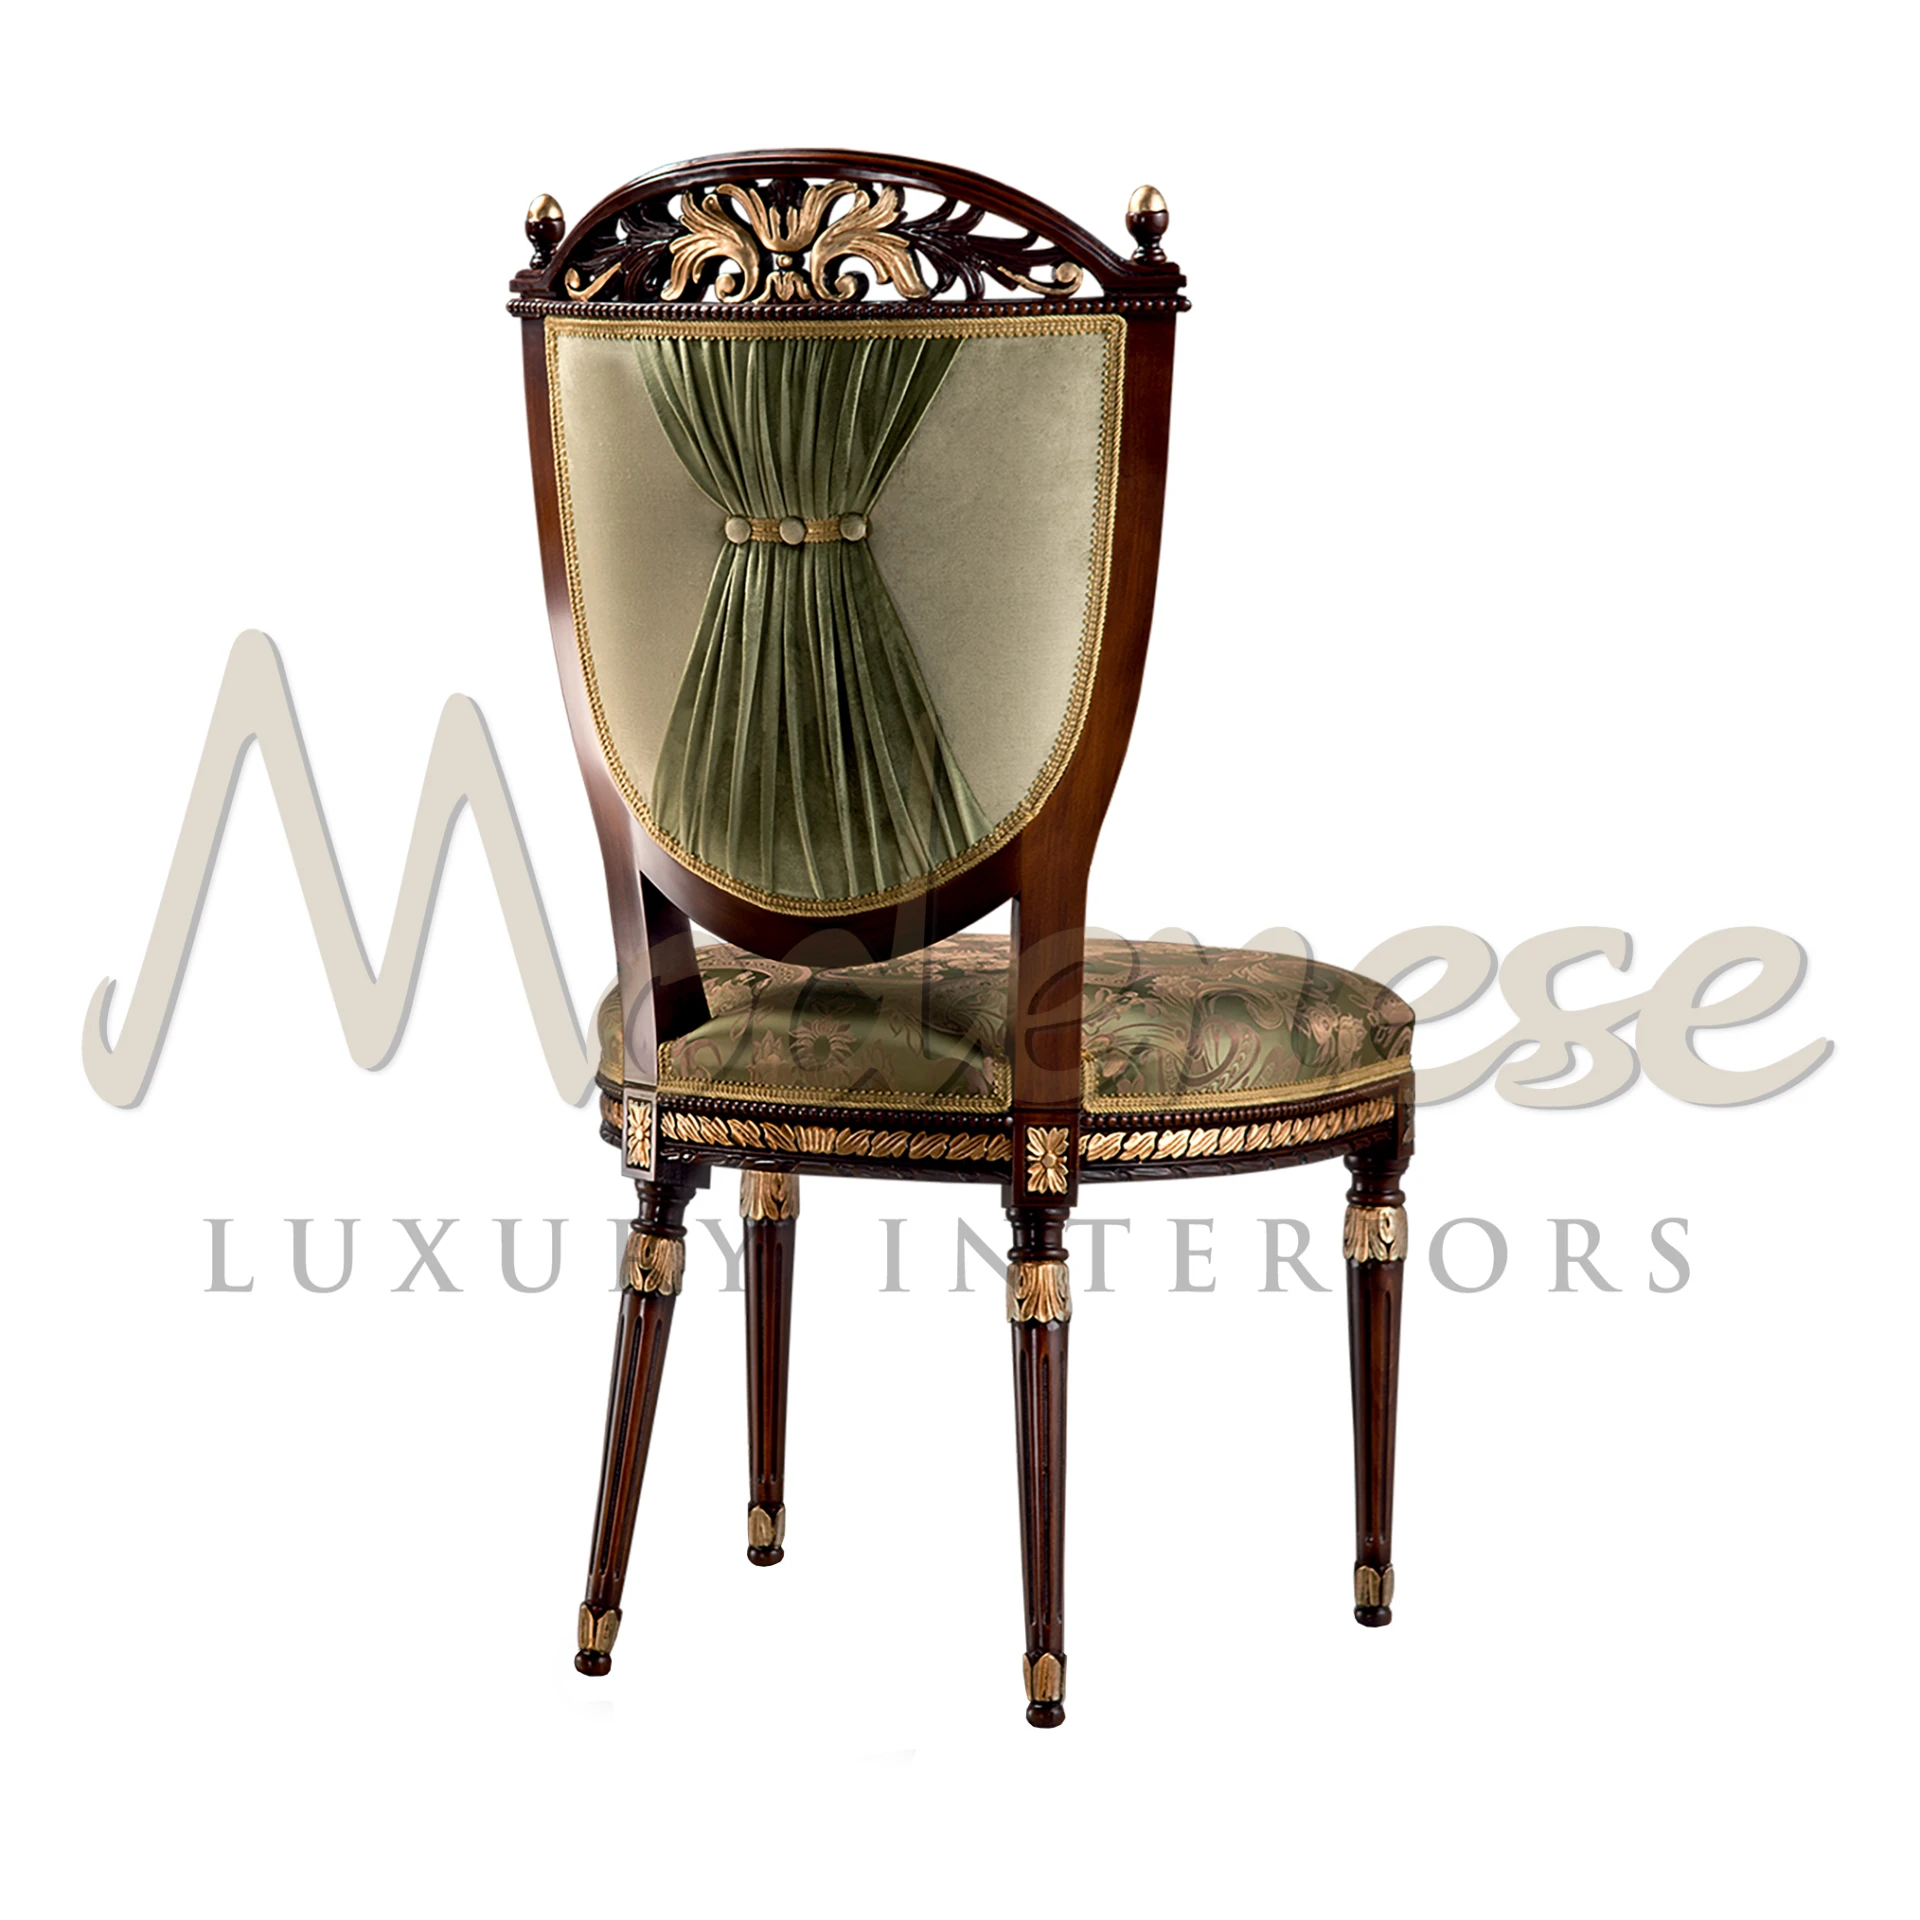 Indulge in luxury with Modenese Furniture's upholstered side chair. Wood frame, gold leaf details, premium floral fabric in green, and elegant backrest design.